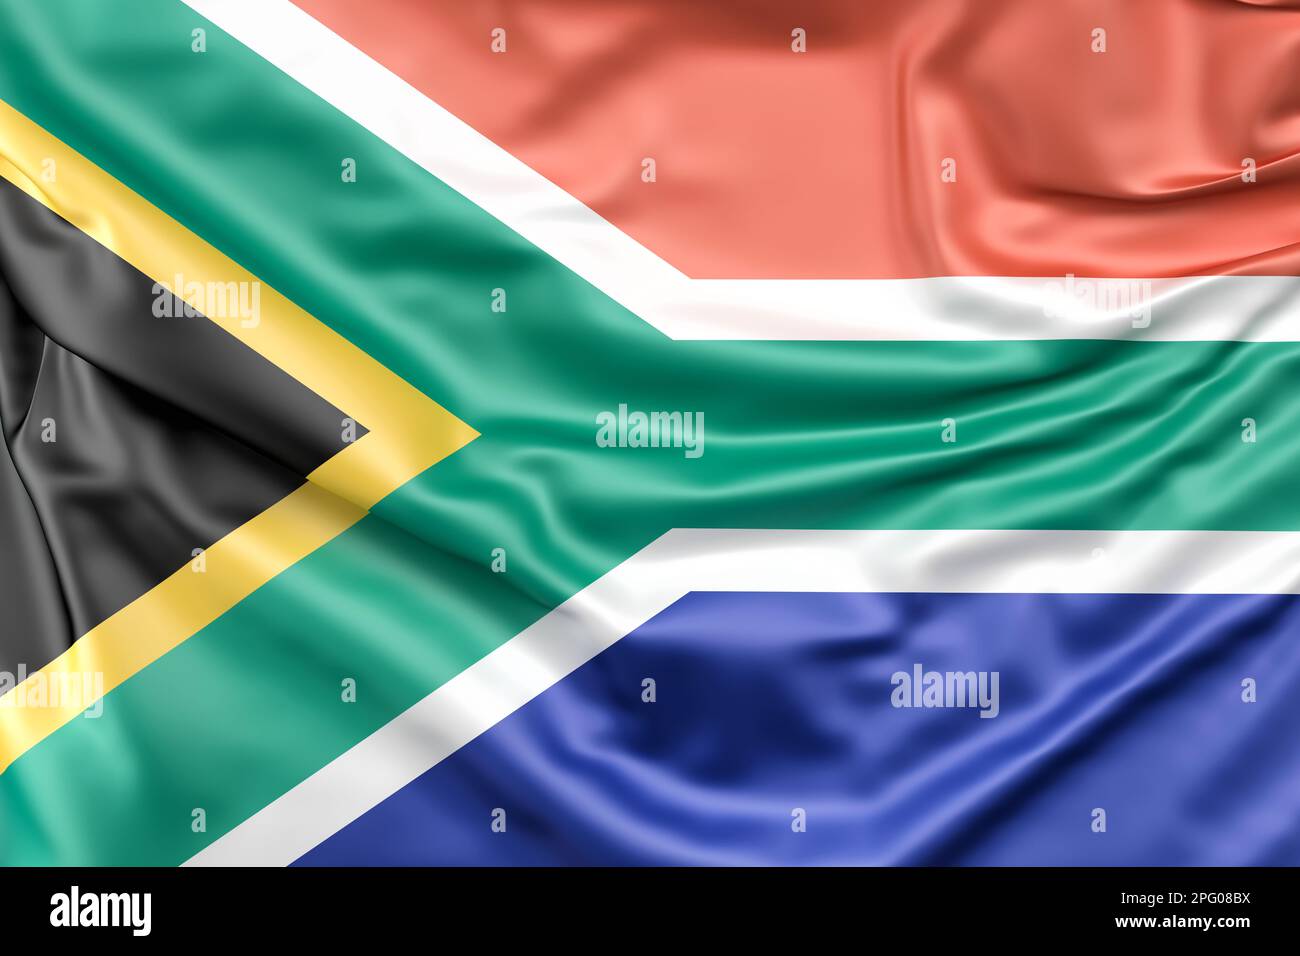 Ruffled Flag of the Republic of South Africa. 3D Rendering Stock Photo